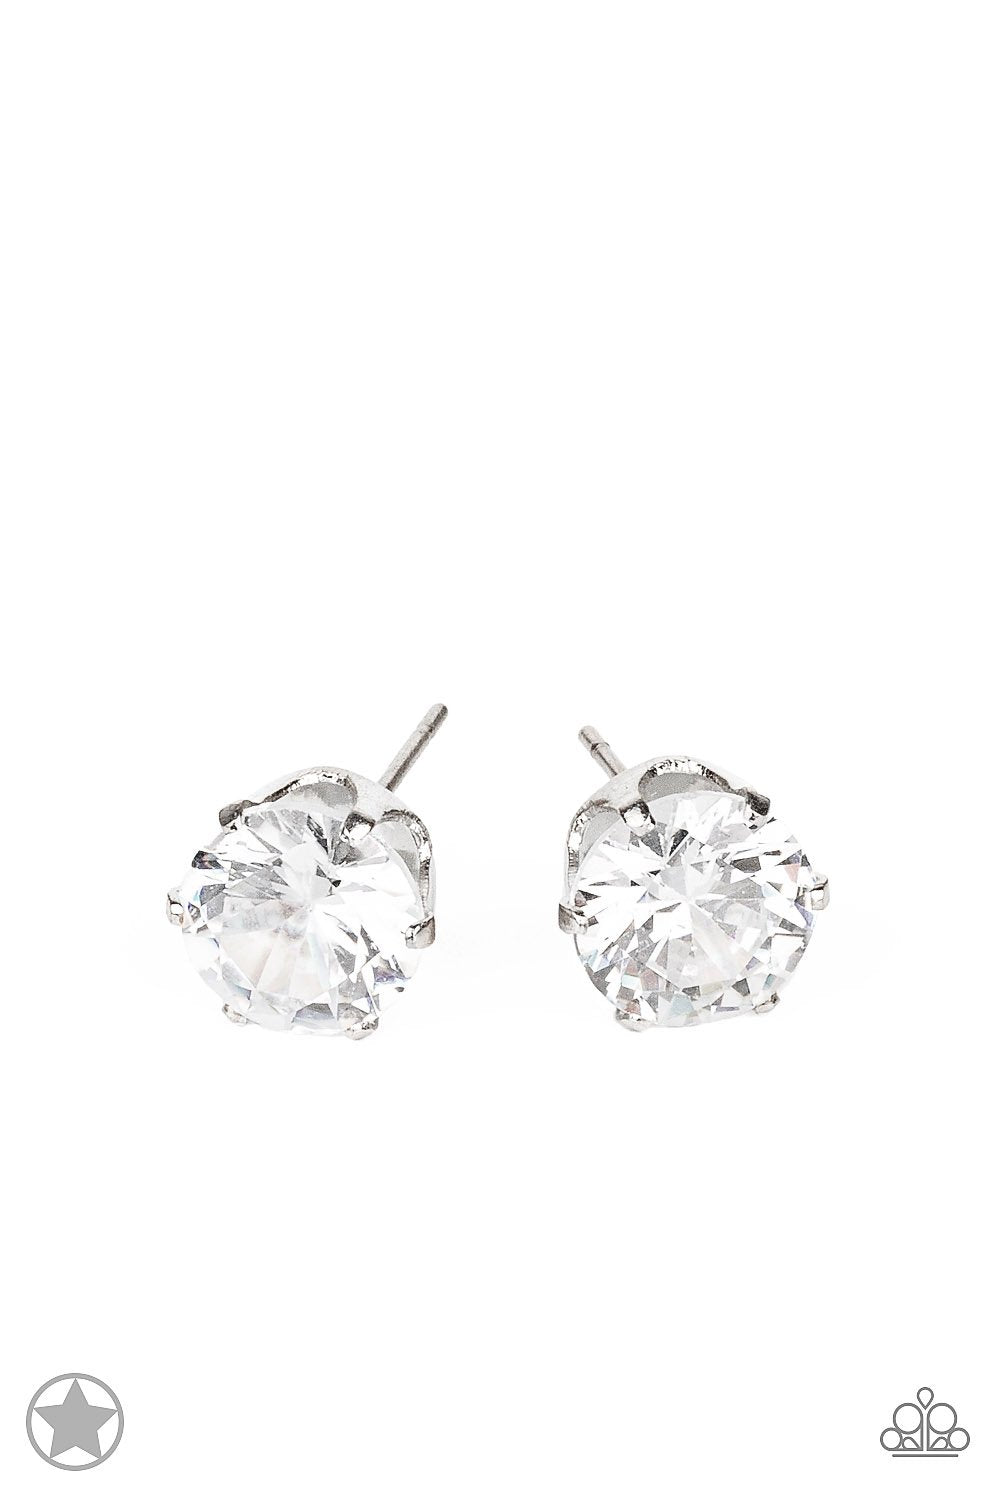 Just In Timeless - White Earrings - Solitaire - Paparazzi Accessories